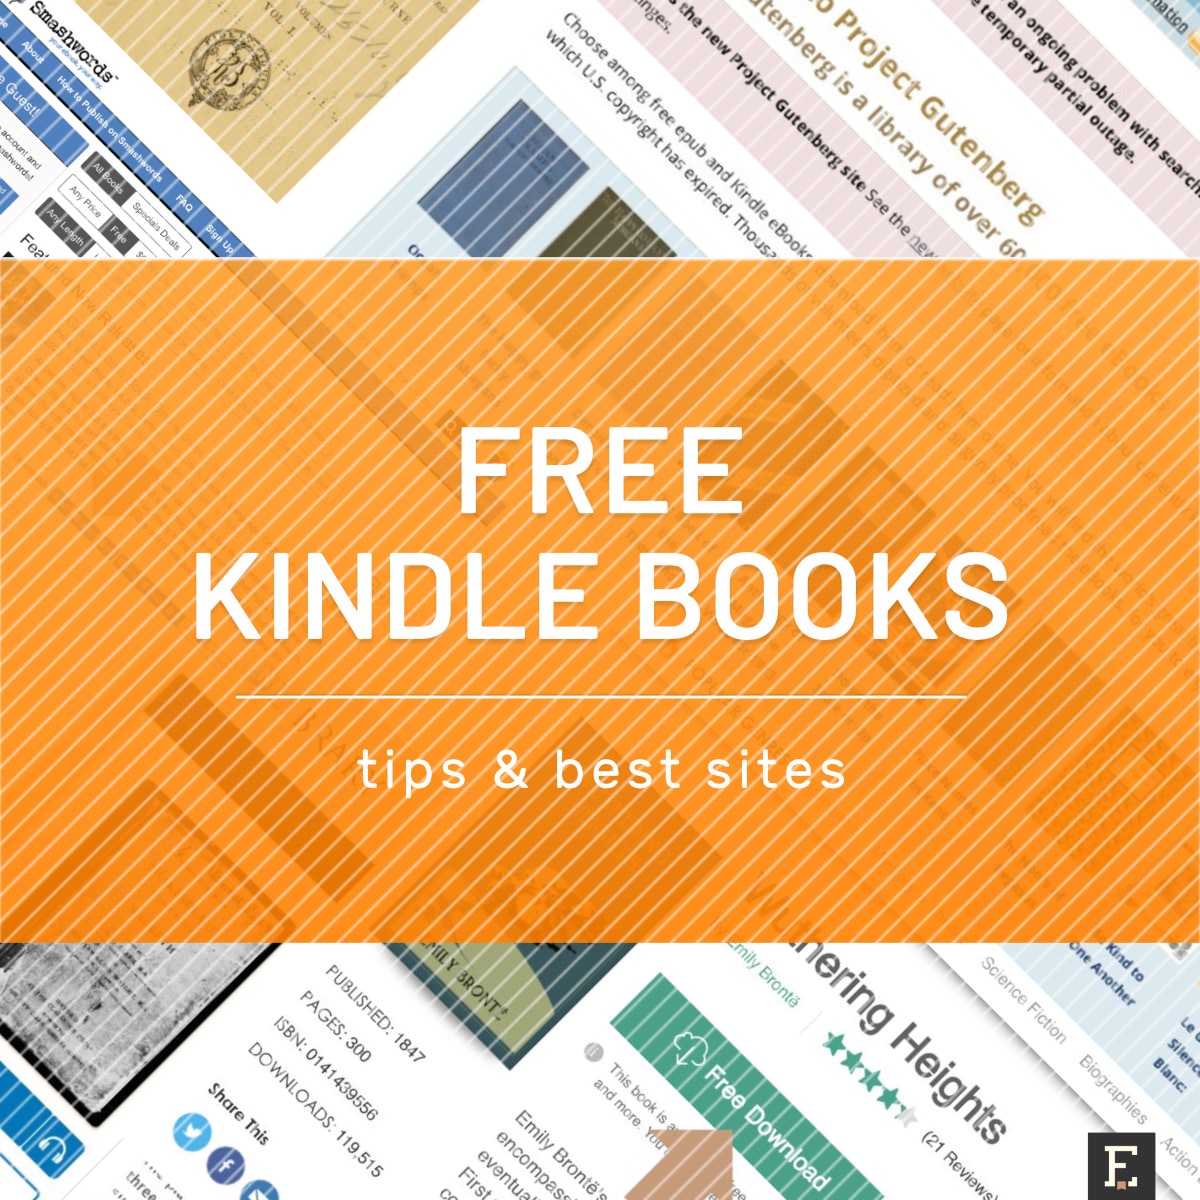 Customer Shares Hack for Getting Free Kindle Books